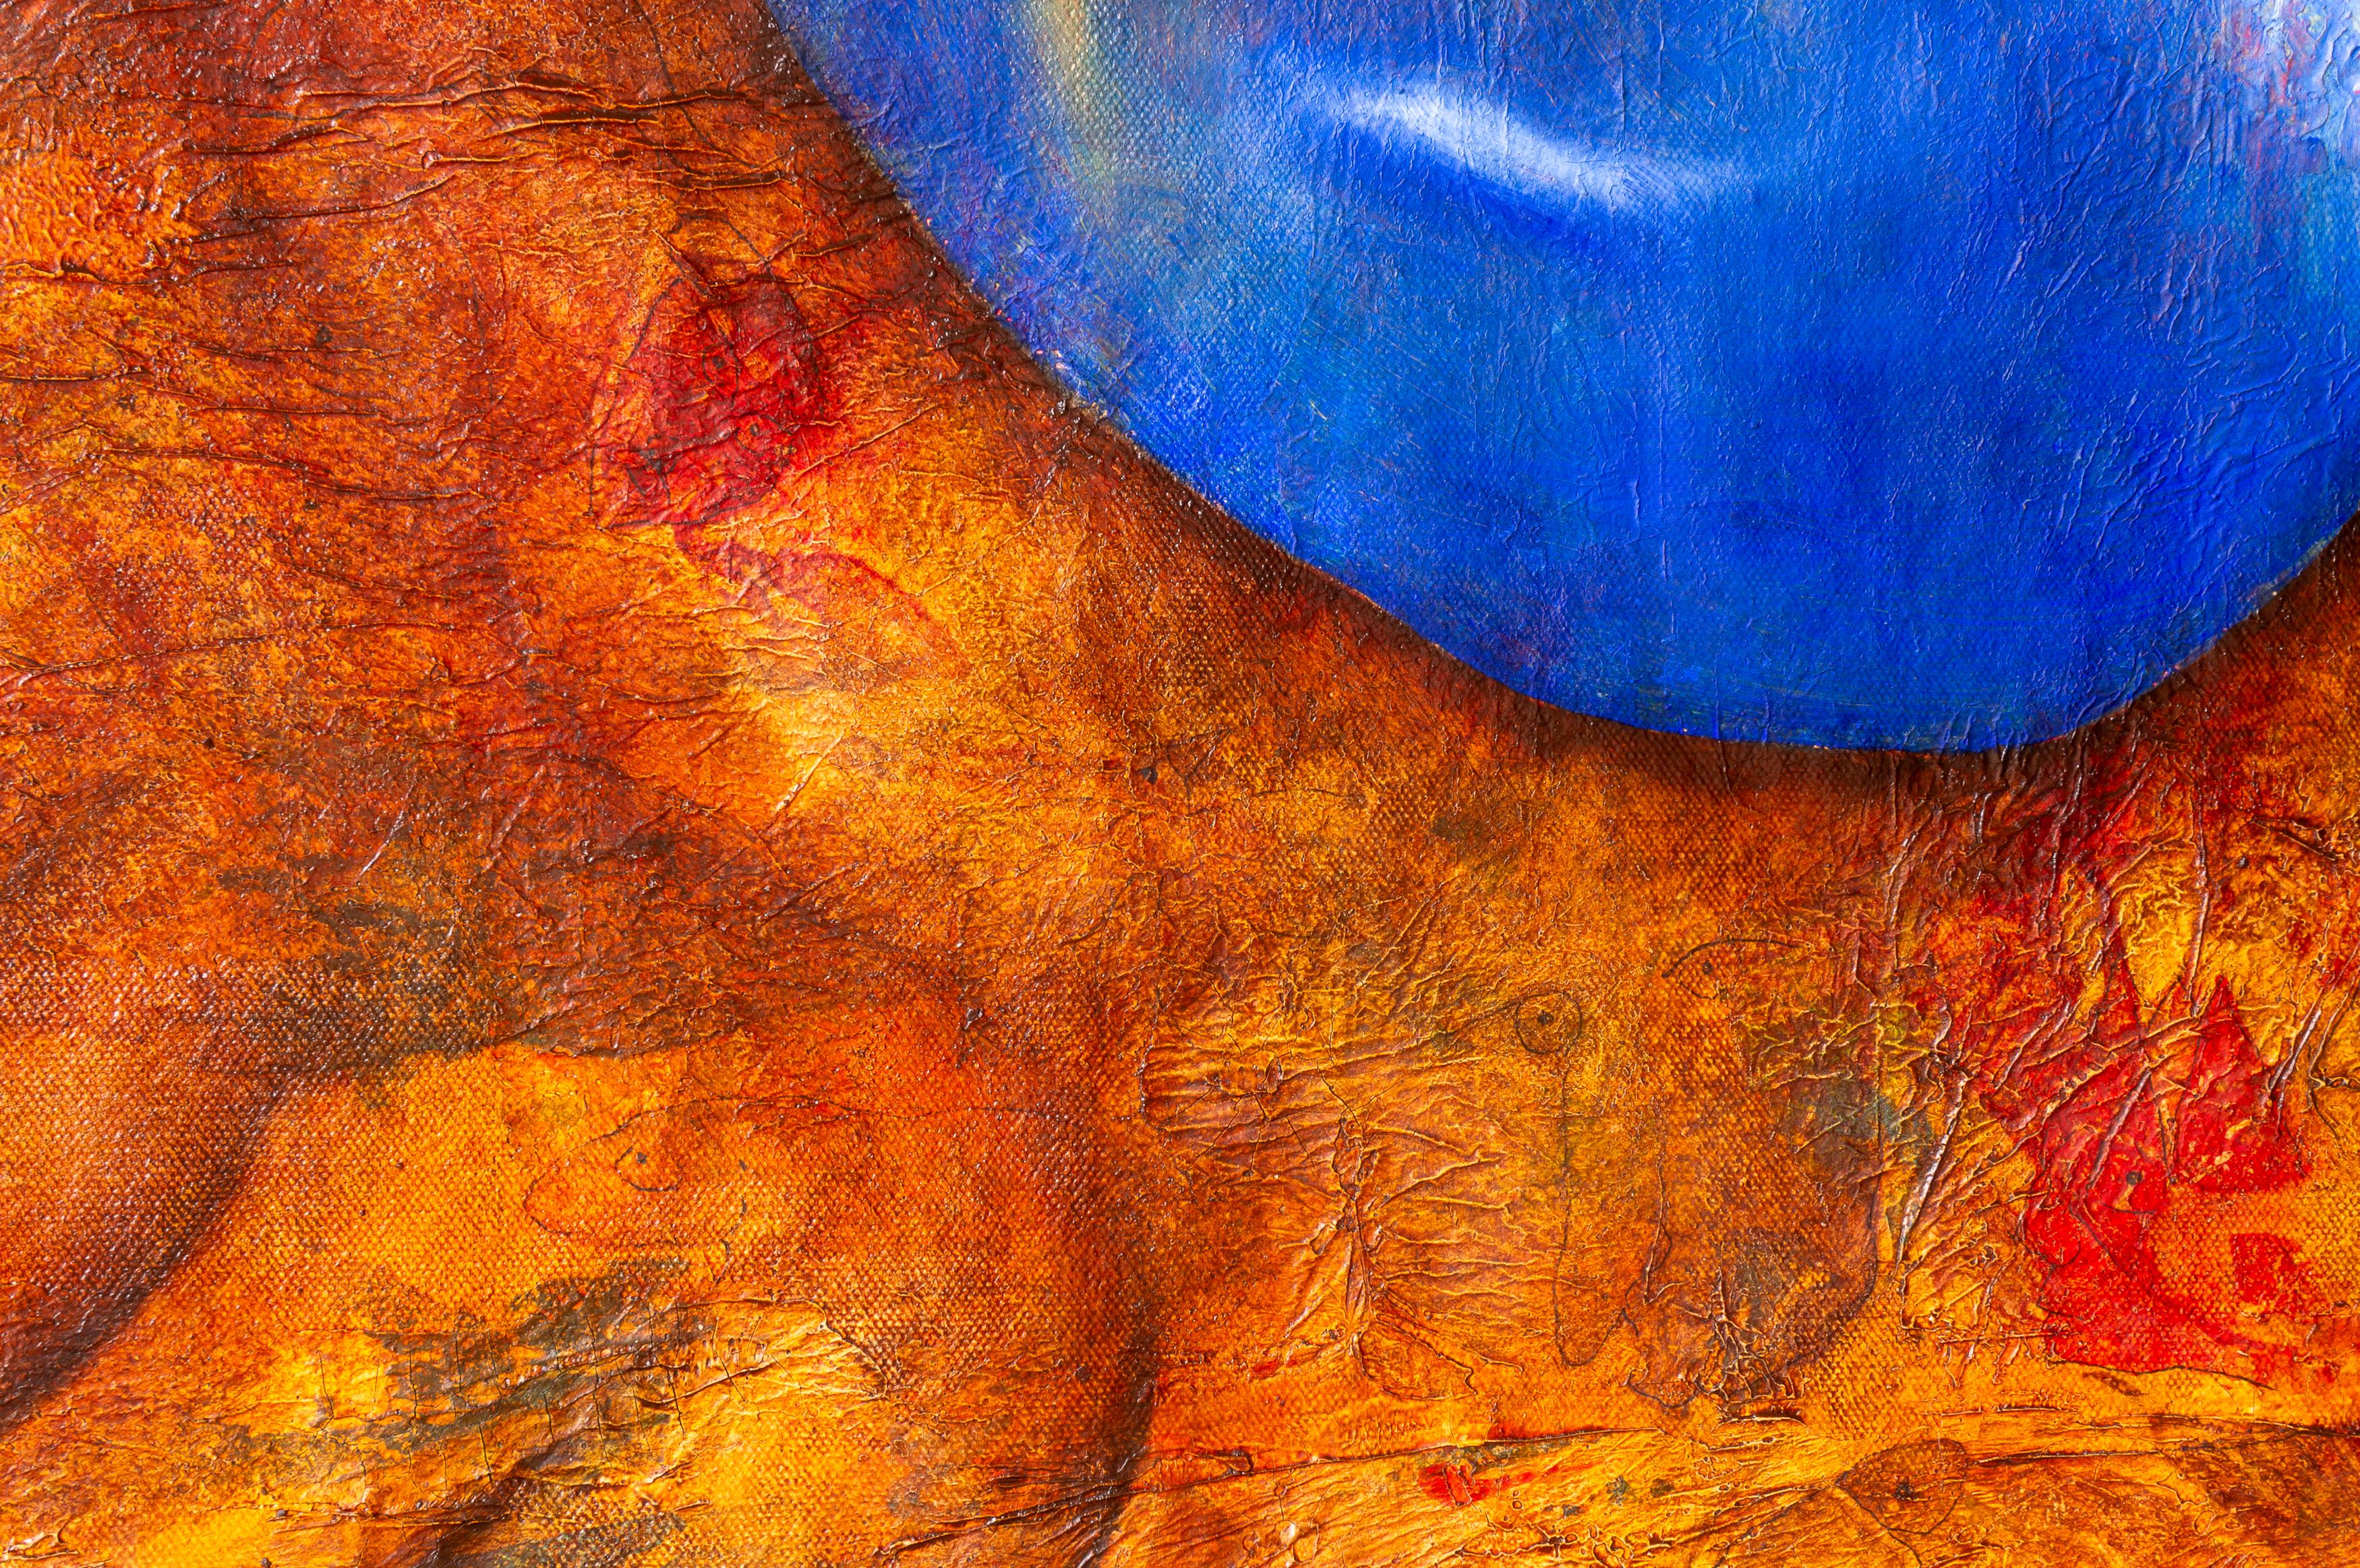 SURREAL Figurative Painting “Night in the Andes” in blue tones, mixed texture For Sale 9